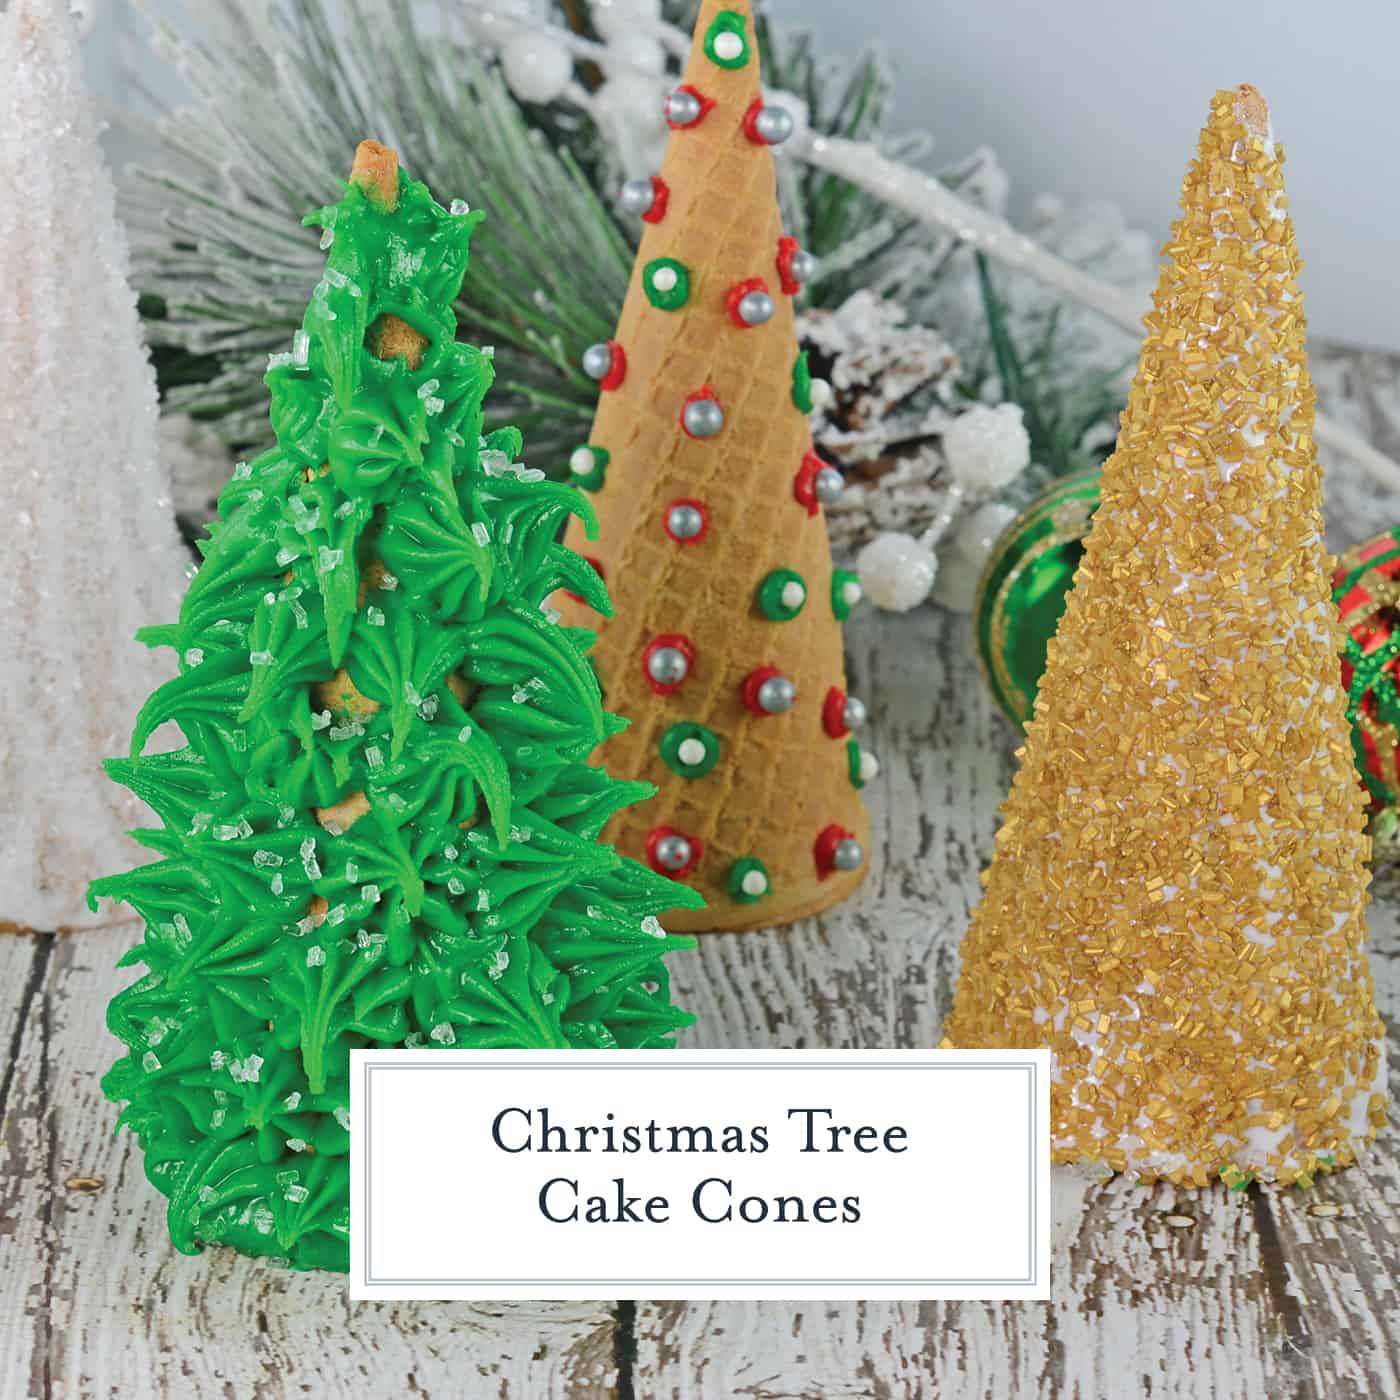 Christmas Tree Cake Cones are filled with cake and frosting and then festively decorated and a fun holiday activity for kids. #christmasactivitiesforkids #cakecones www.savoryexperiments.com